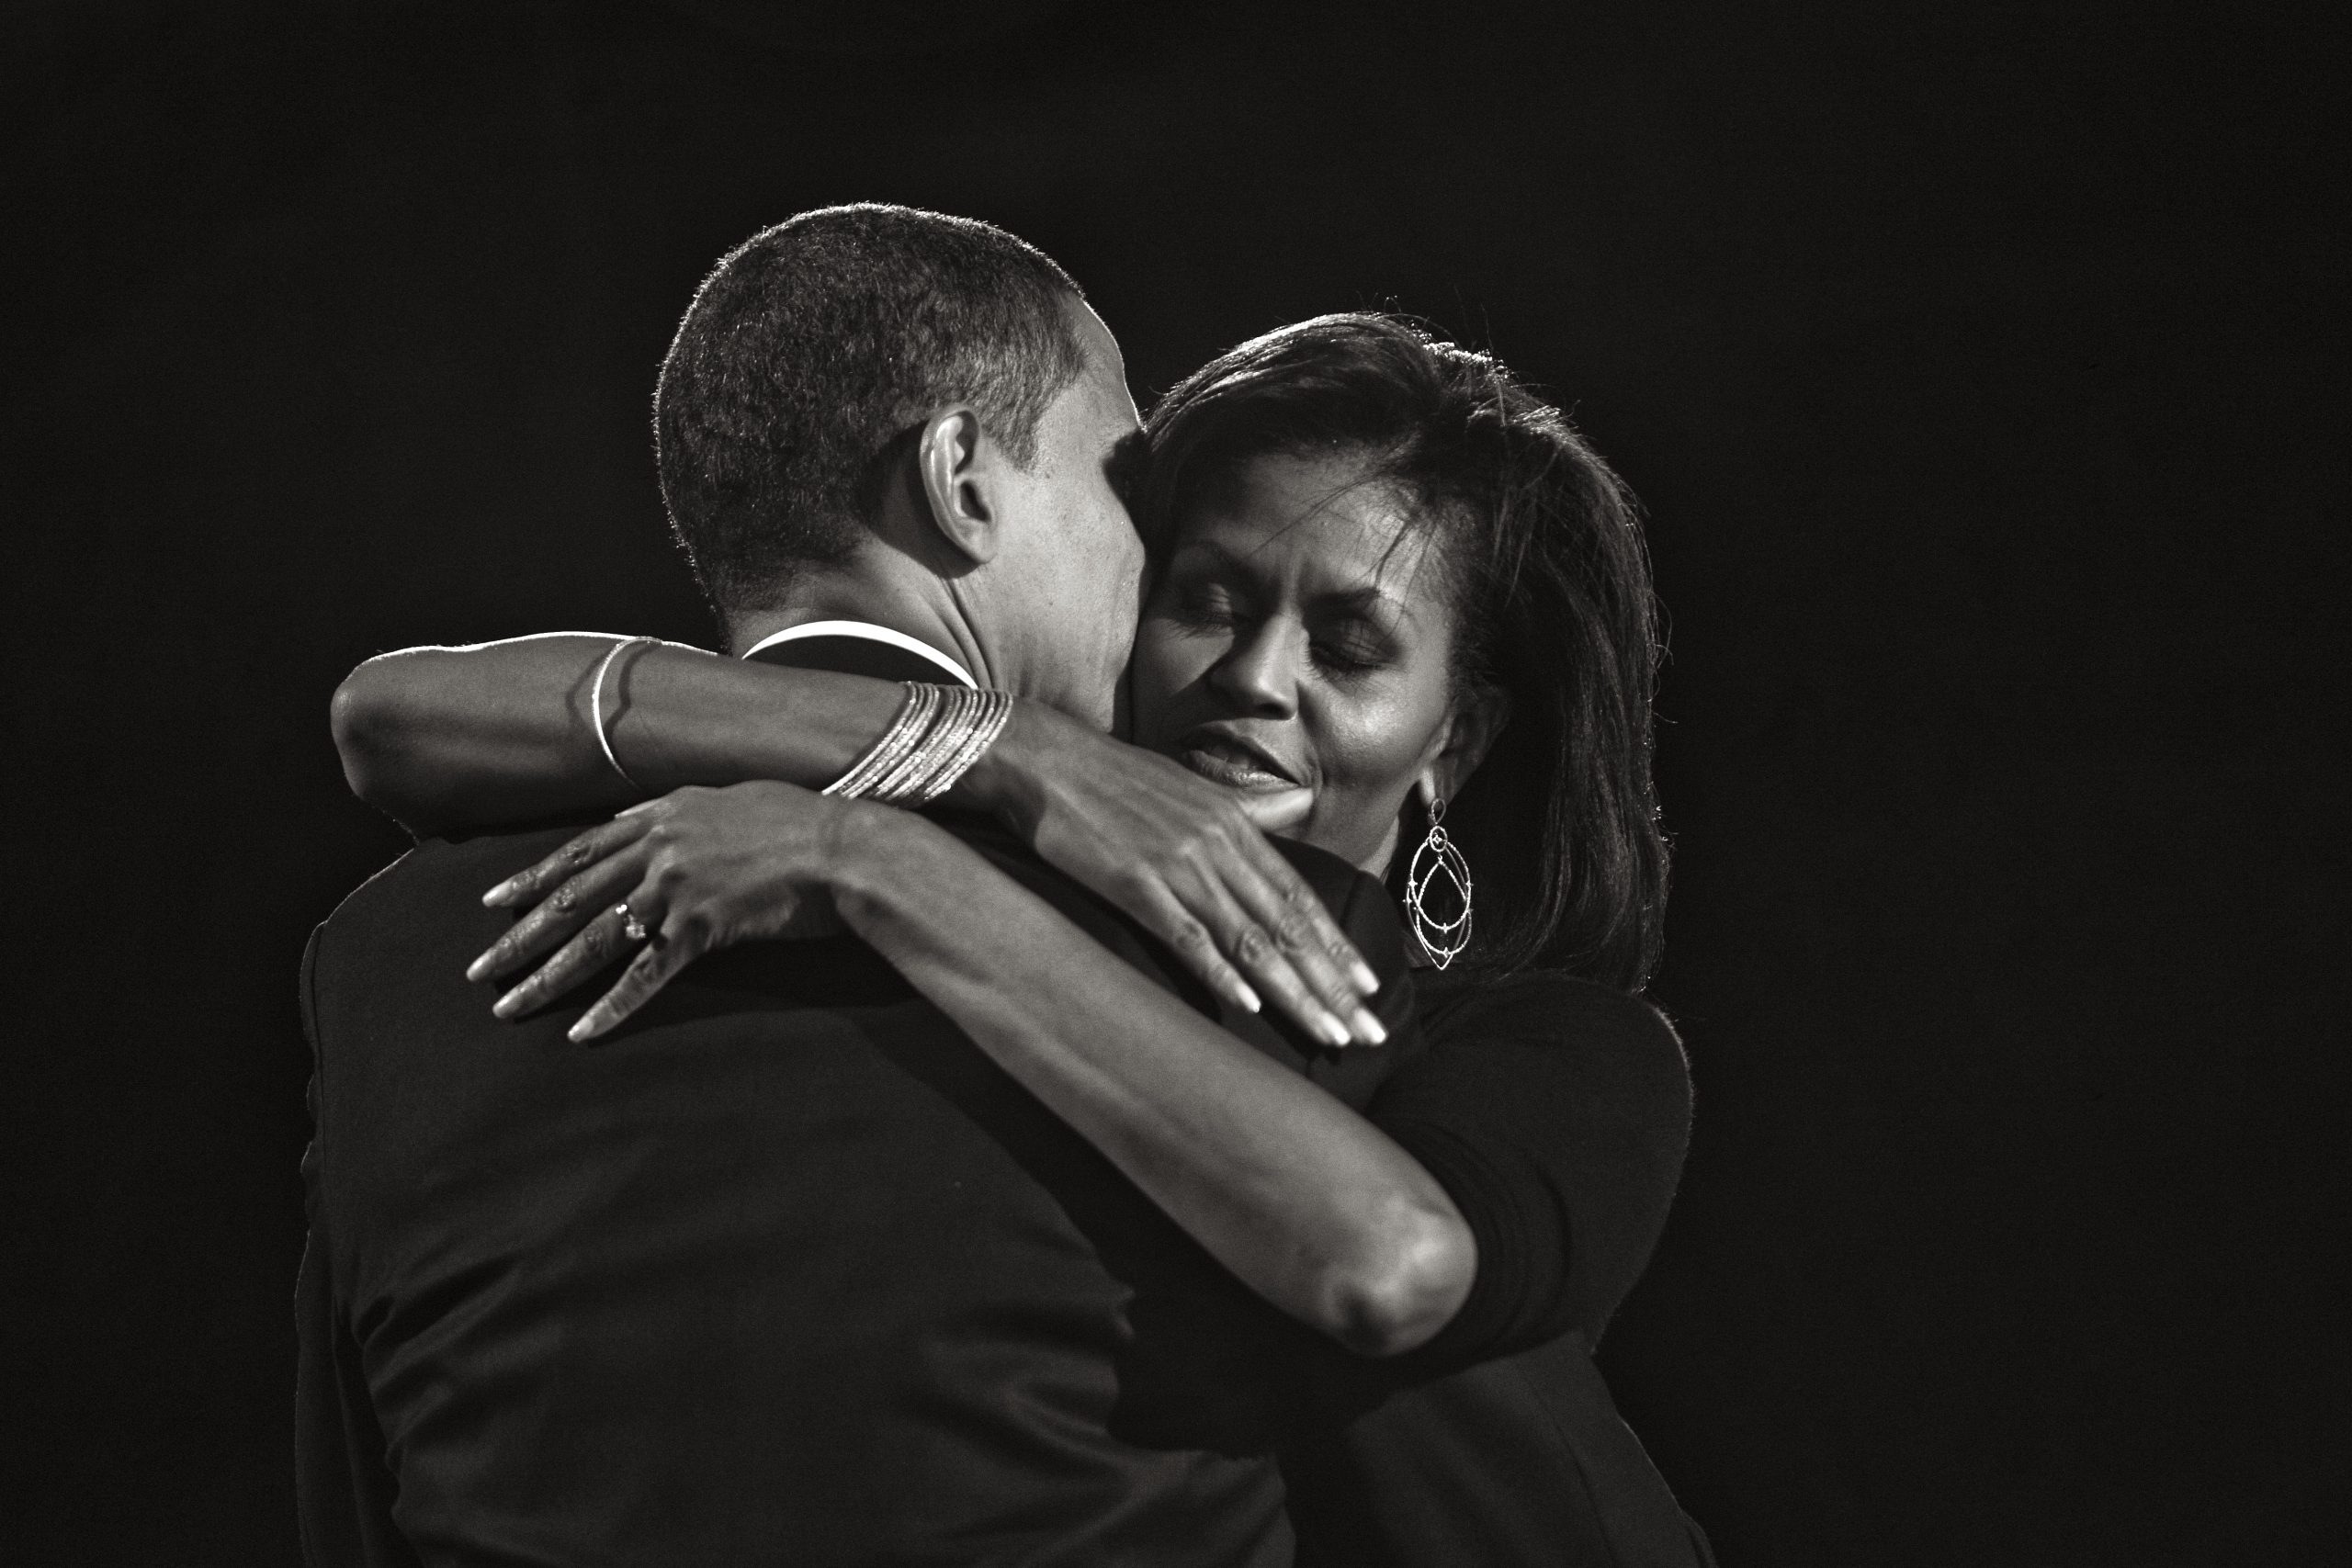 Barack and Michelle Obama, photographer: Brooks Kraft. Gallery: Tres Hombres Art